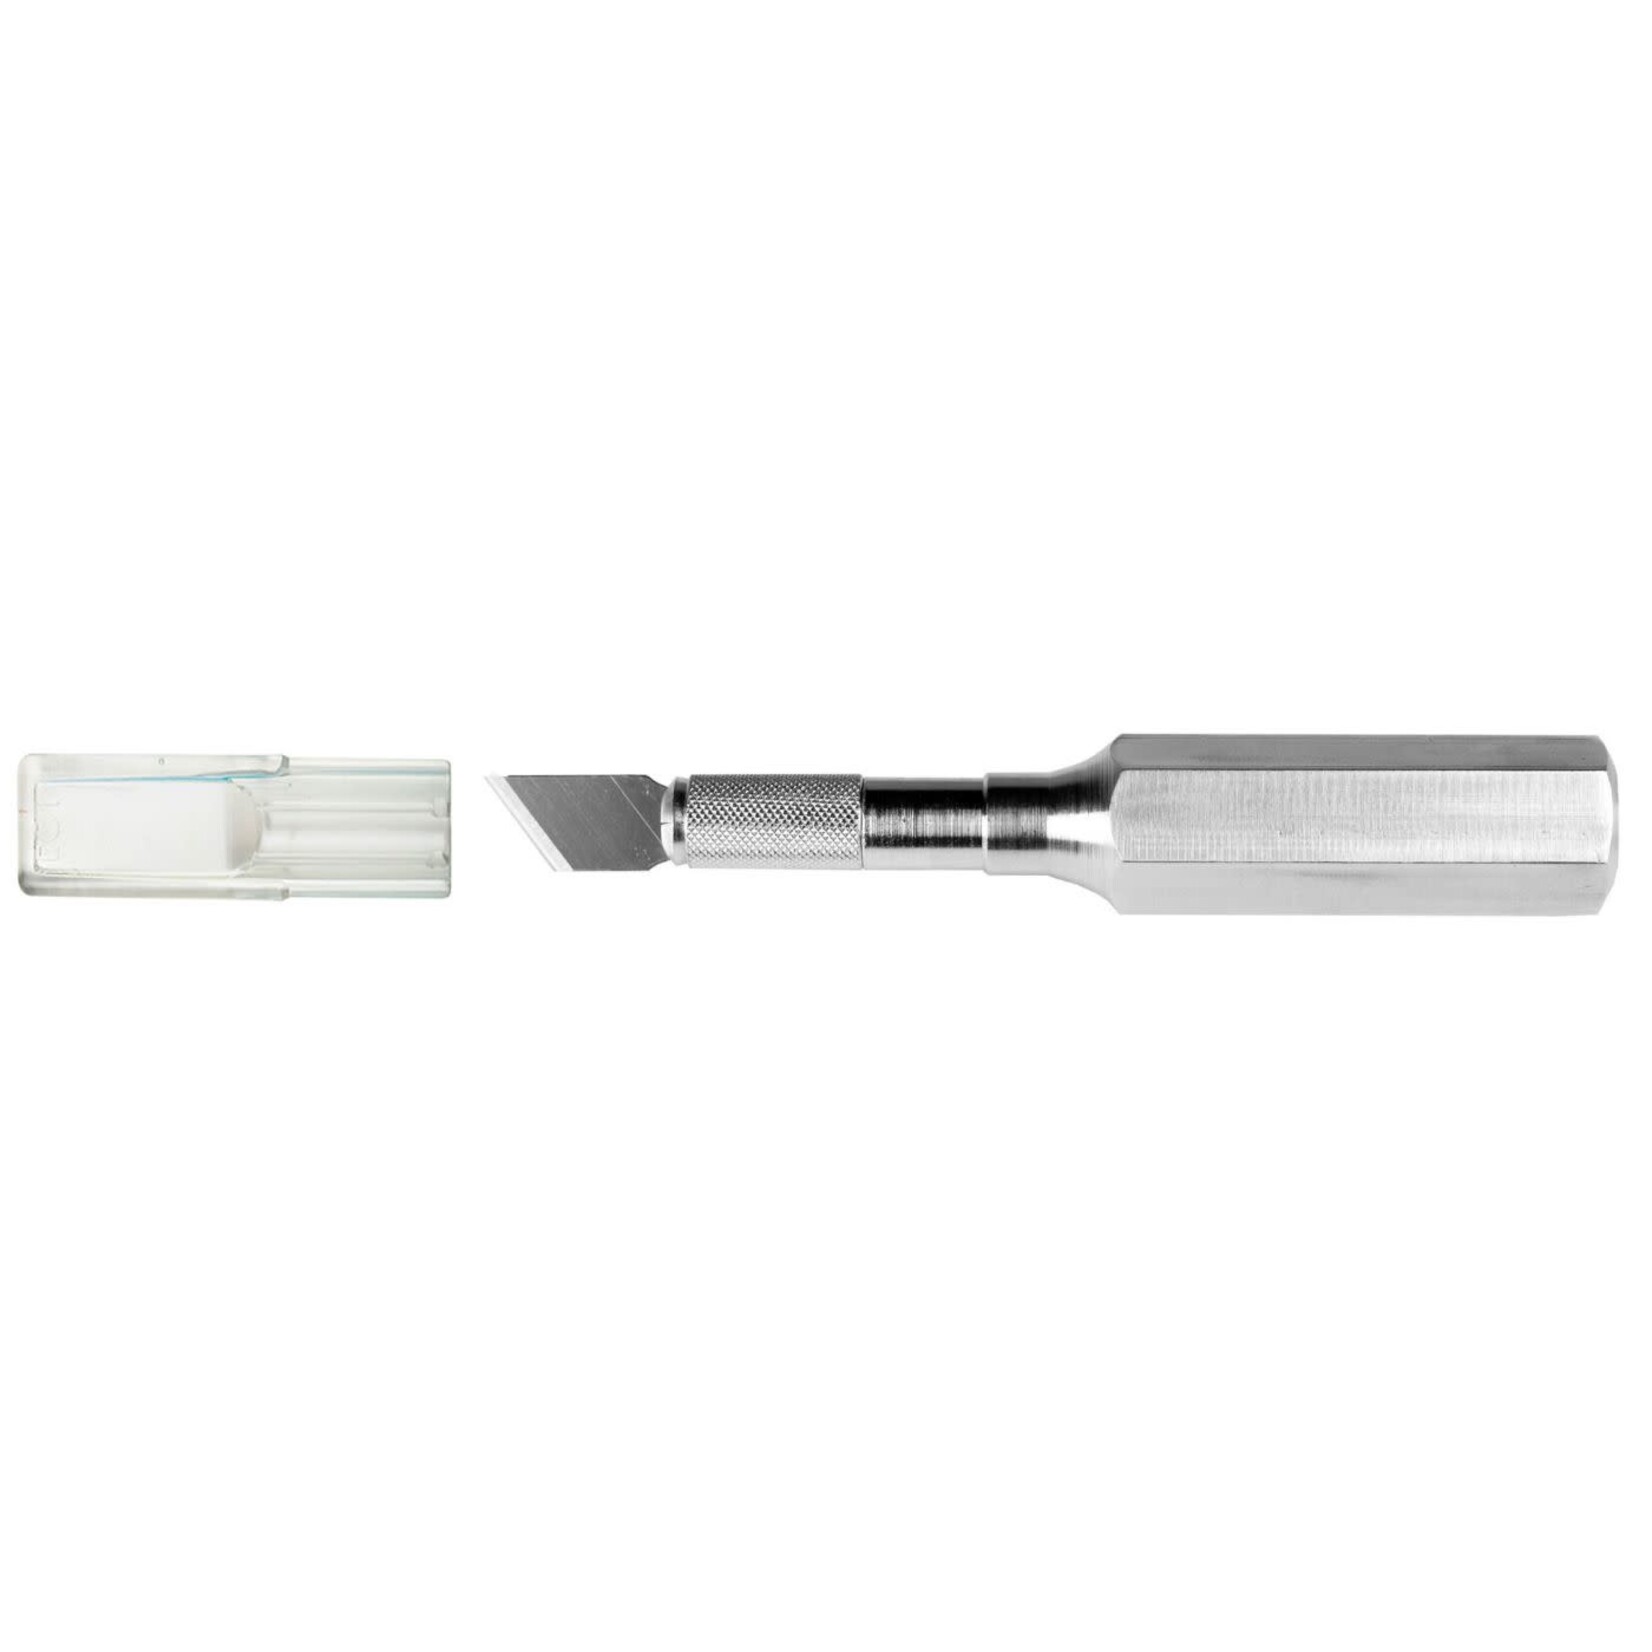 Excel K6 Knife with Safety Cap